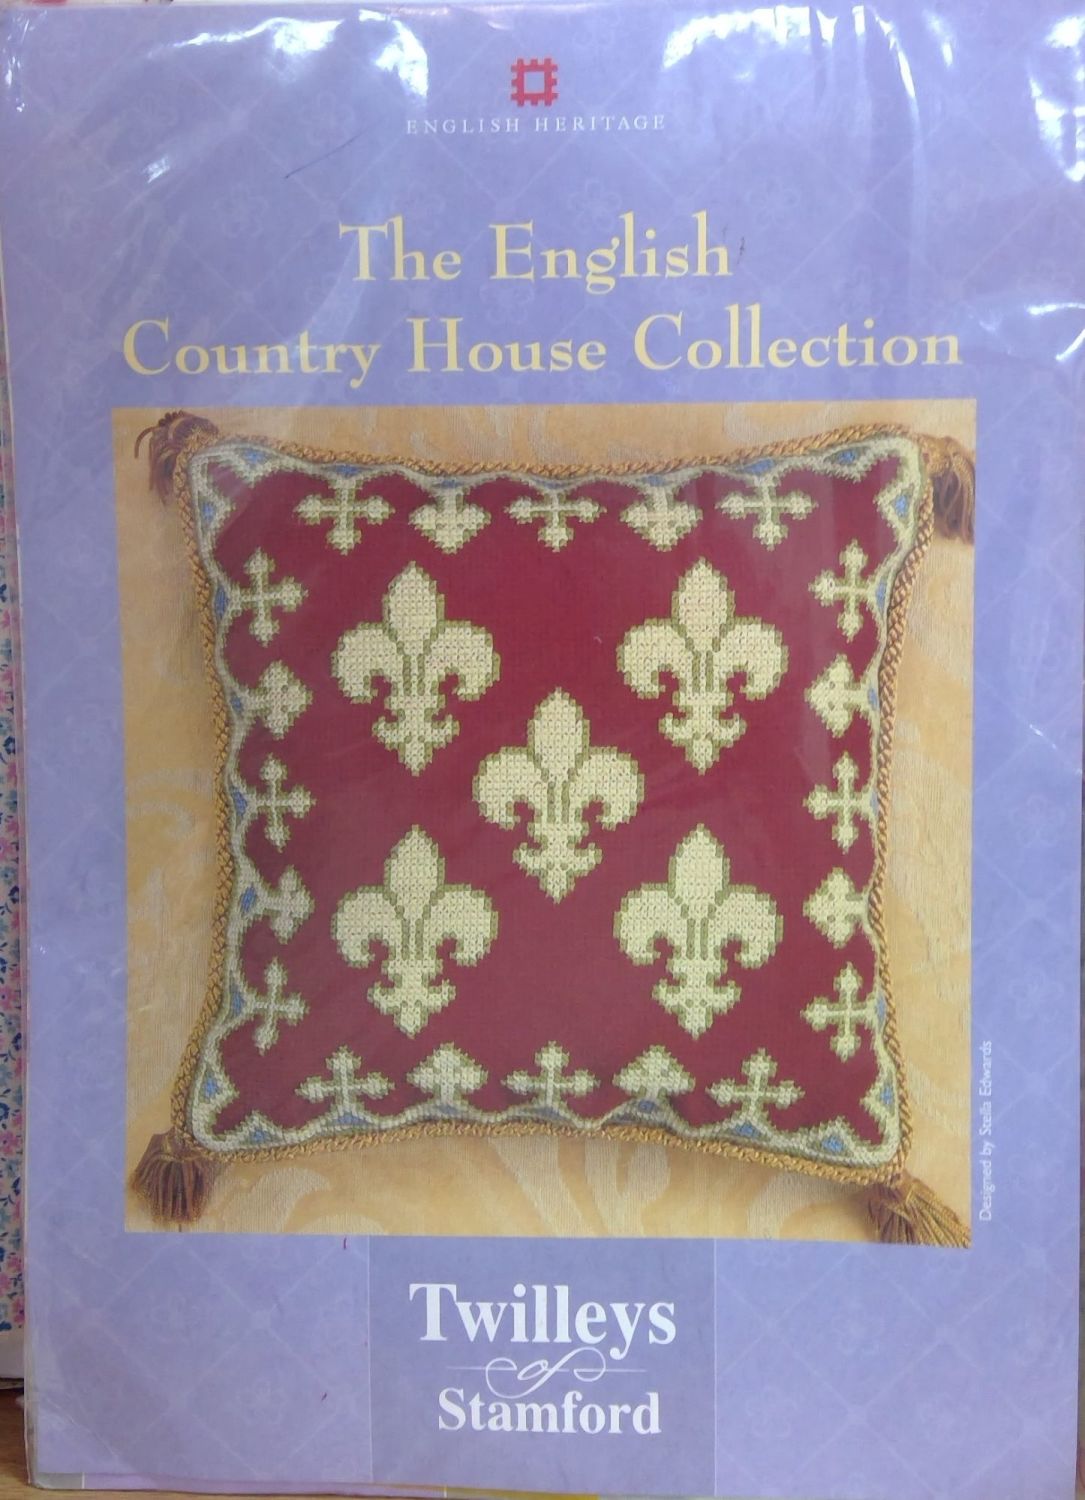 TWILLEYS OF STAMFORD CROSS STITCH -ENGLISH HERITAGE COUNTRY HOUSE COLLECTIO